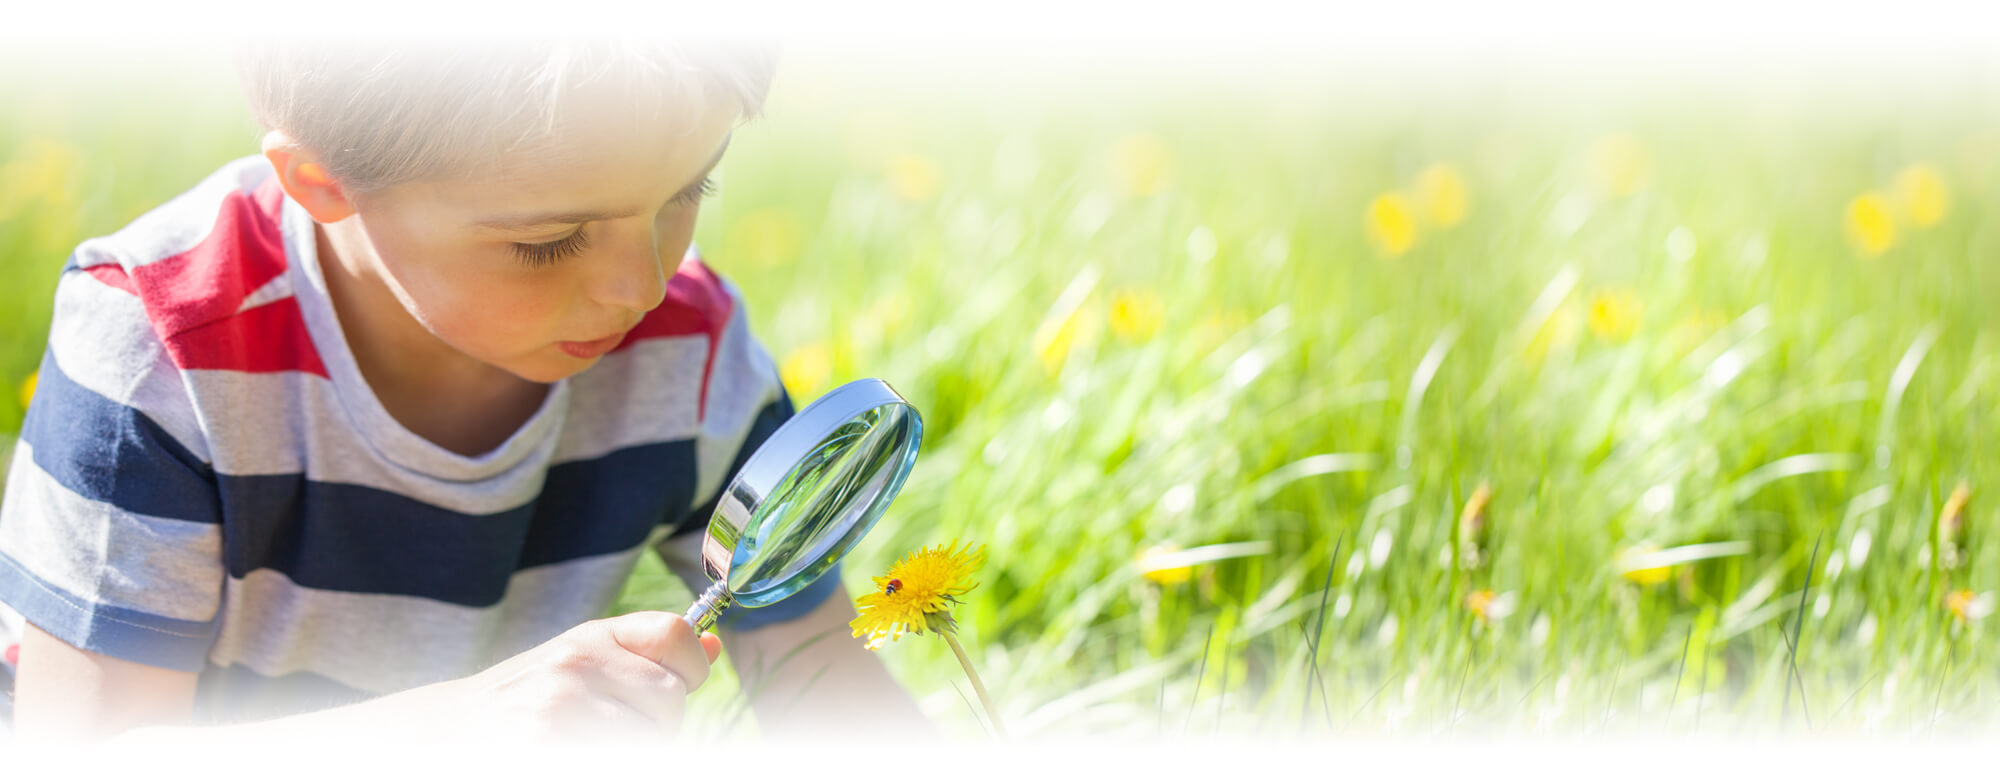 Kindergarten boy with magnifying glass